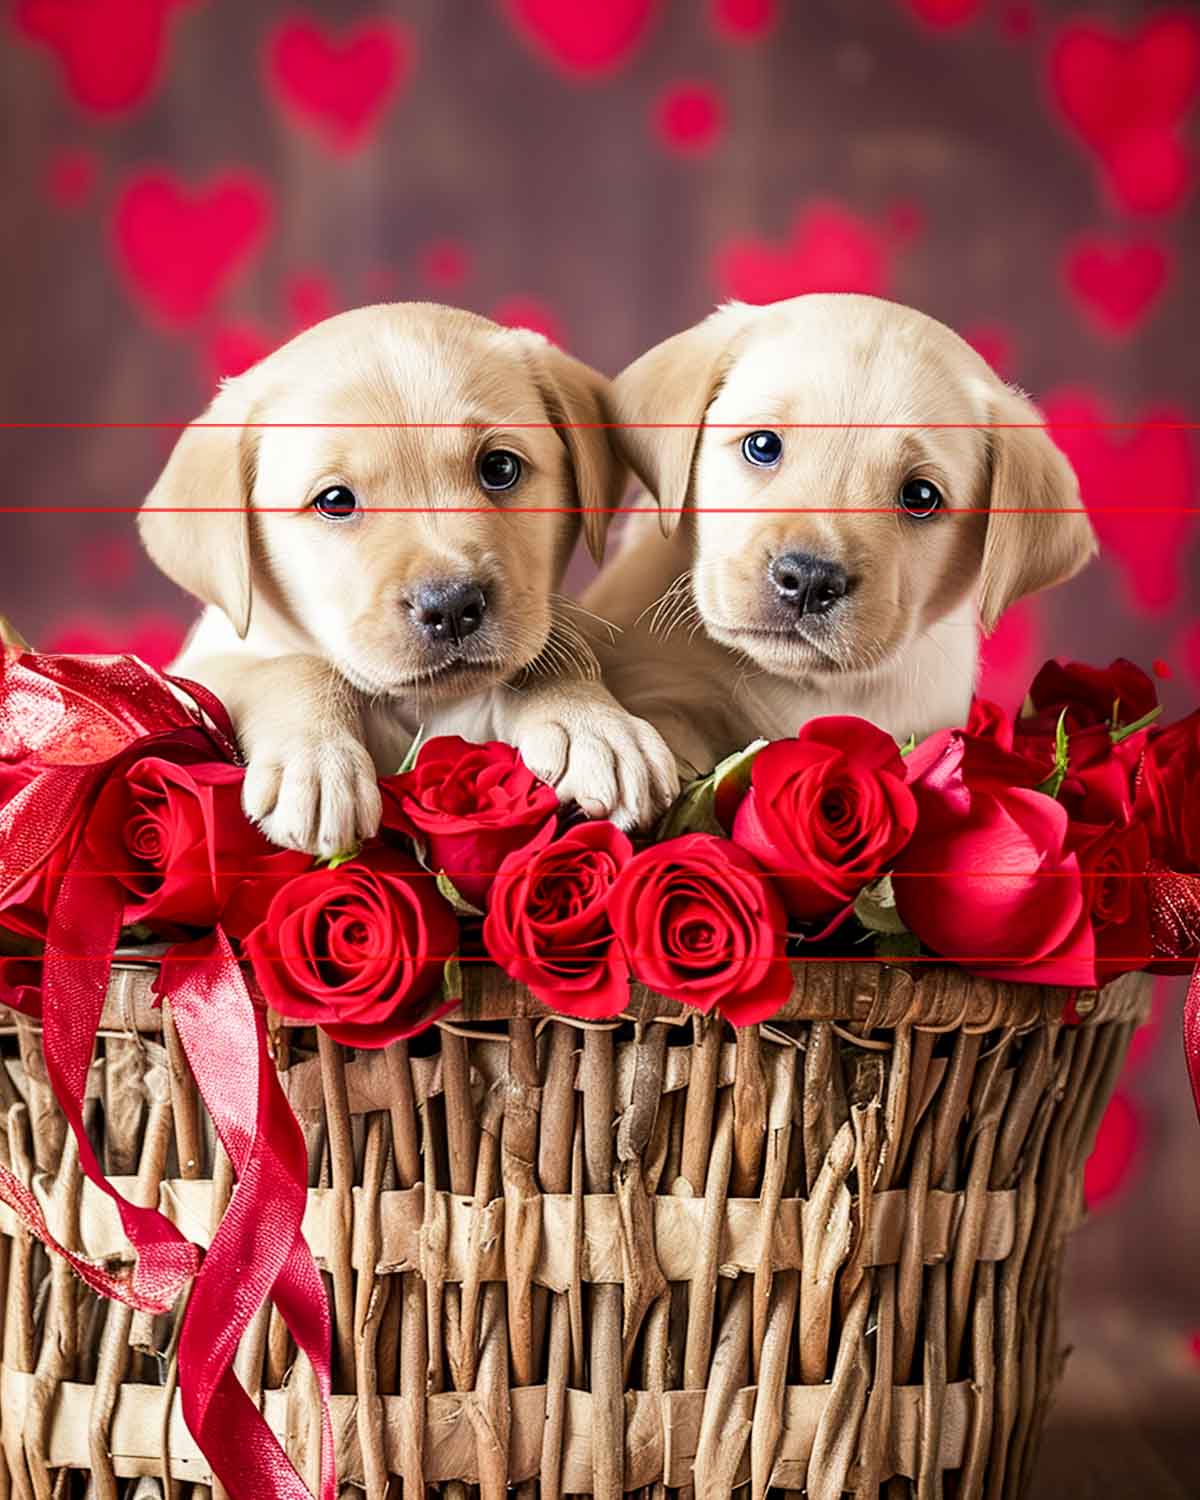 Two adorable yellow Labrador Retriever puppies sit inside a woven basket adorned with vibrant red roses and red ribbons. The background features a bokeh effect with red heart shapes, creating a warm and loving atmosphere in this charming picture.